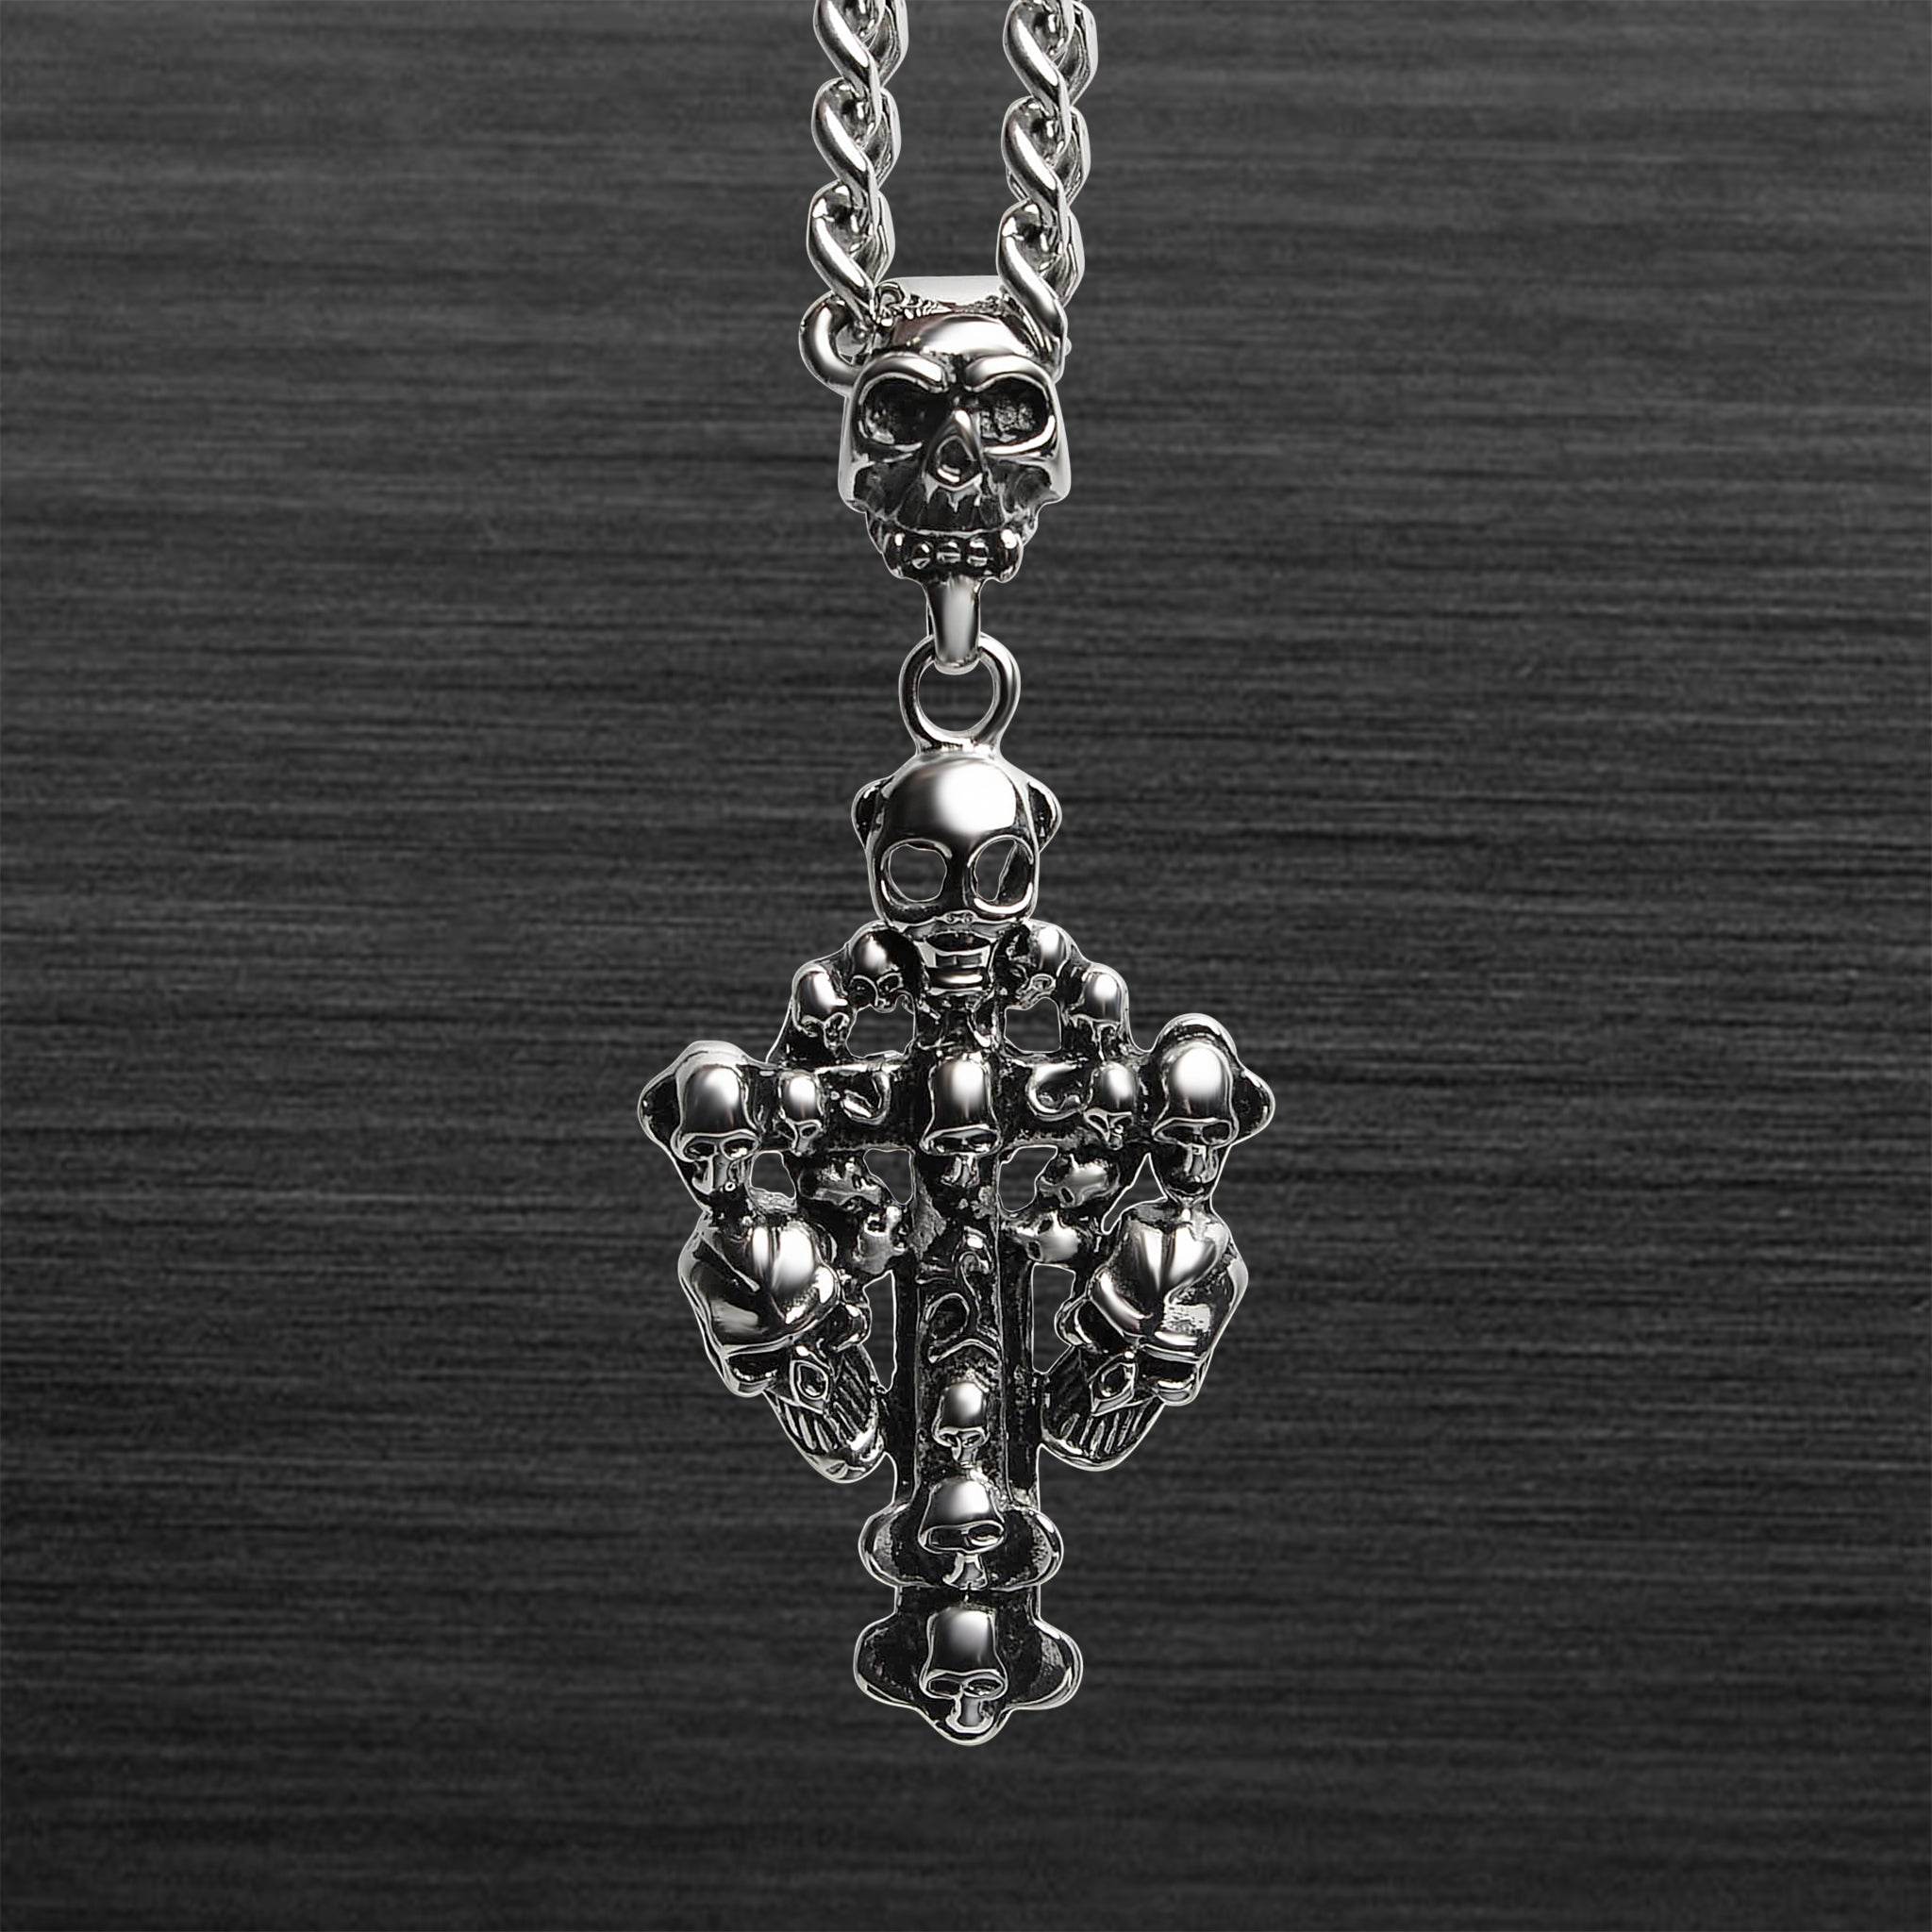 Stainless Steel SKULL Celtic Cross Curb Chain Necklace / PDK0131-RTL